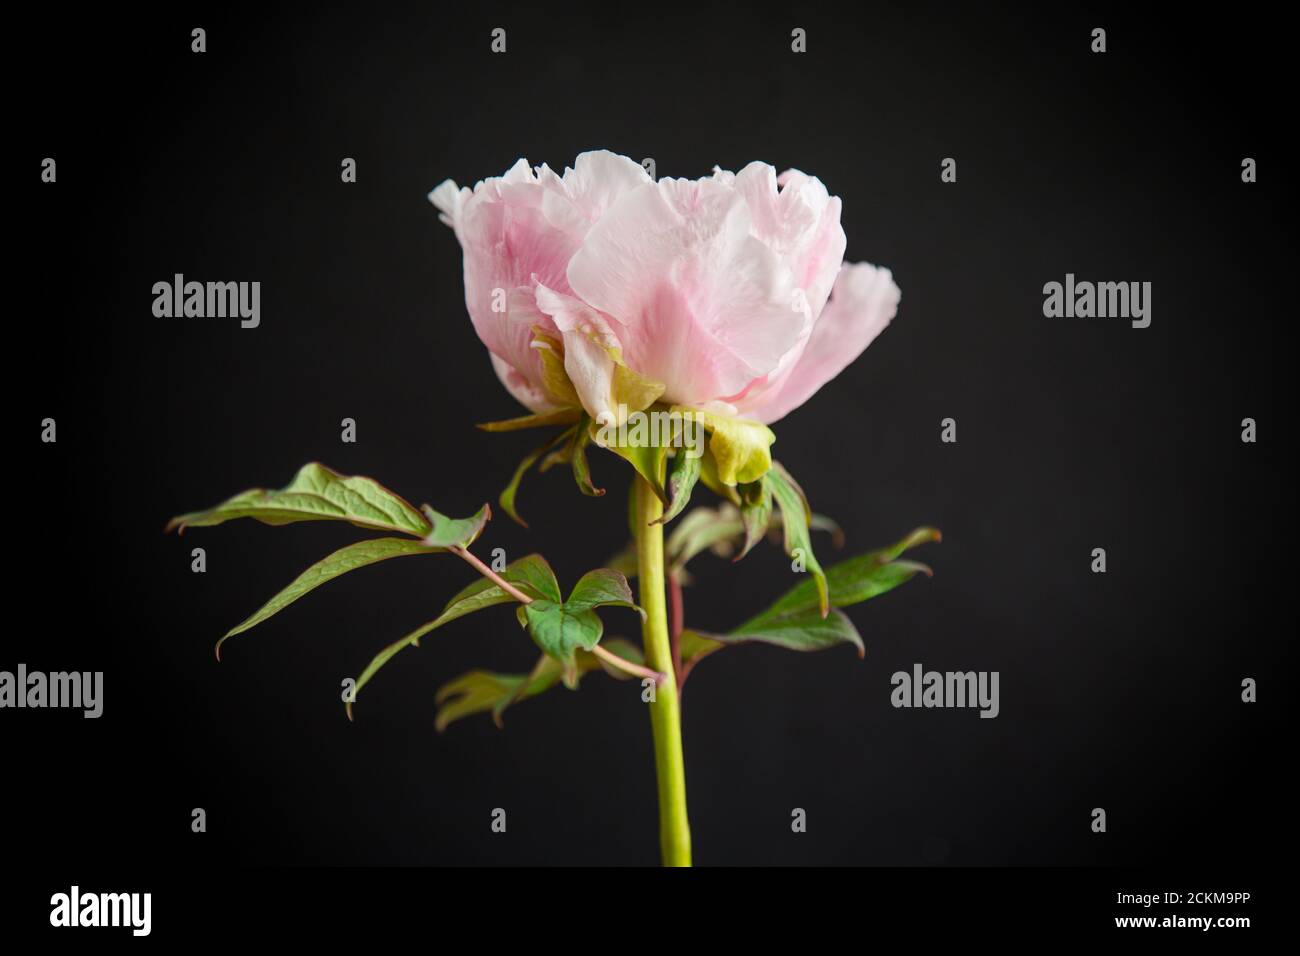 blooming pink tree peony flower on black background Stock Photo